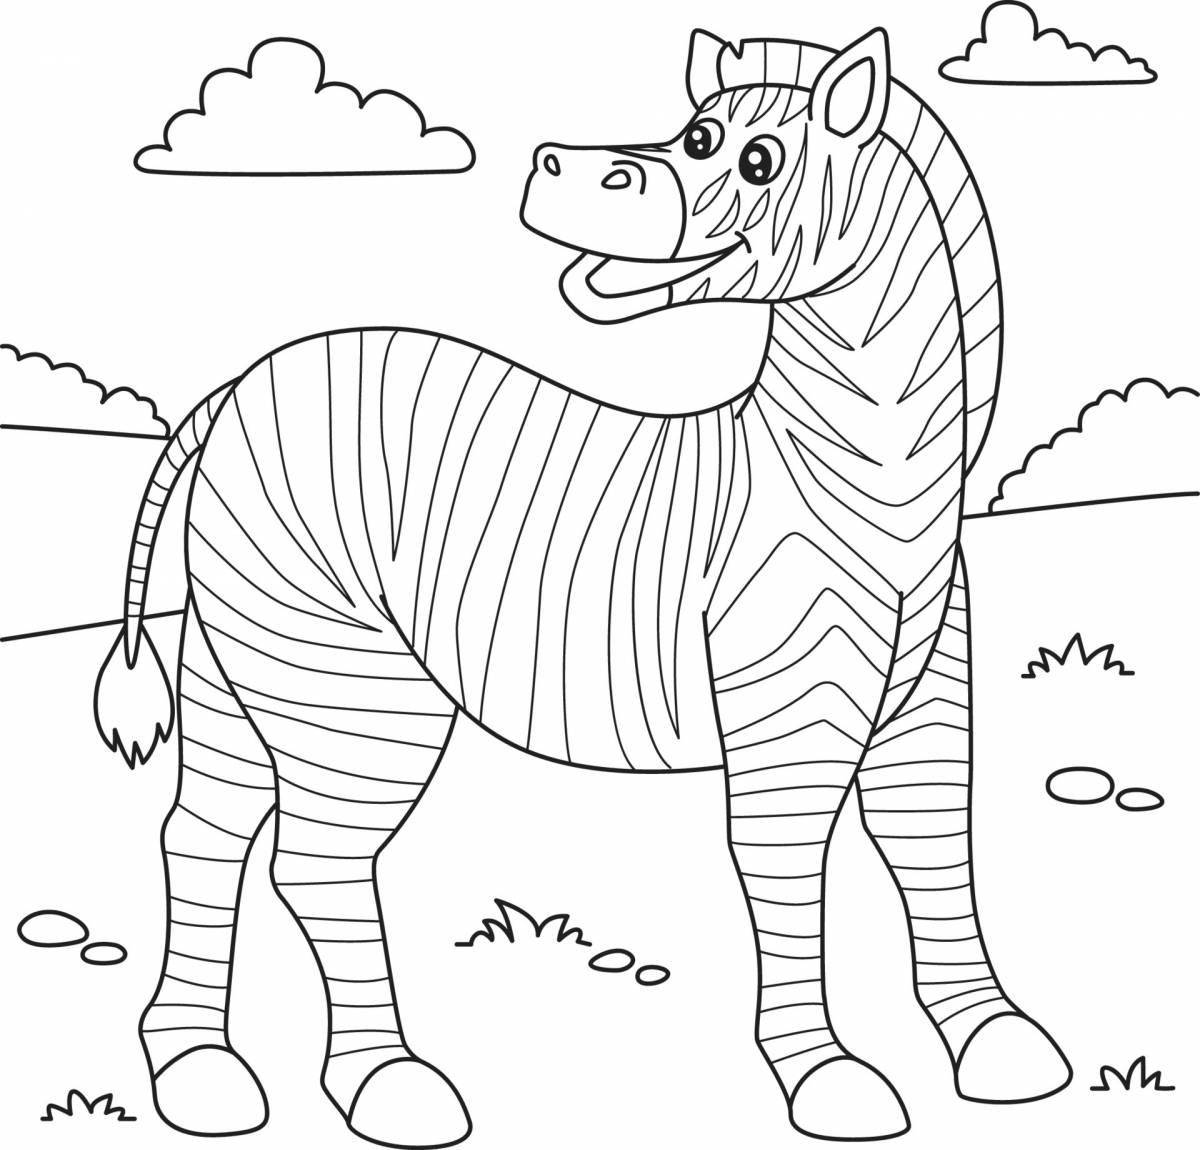 Incredible zebra coloring book for 3-4 year olds